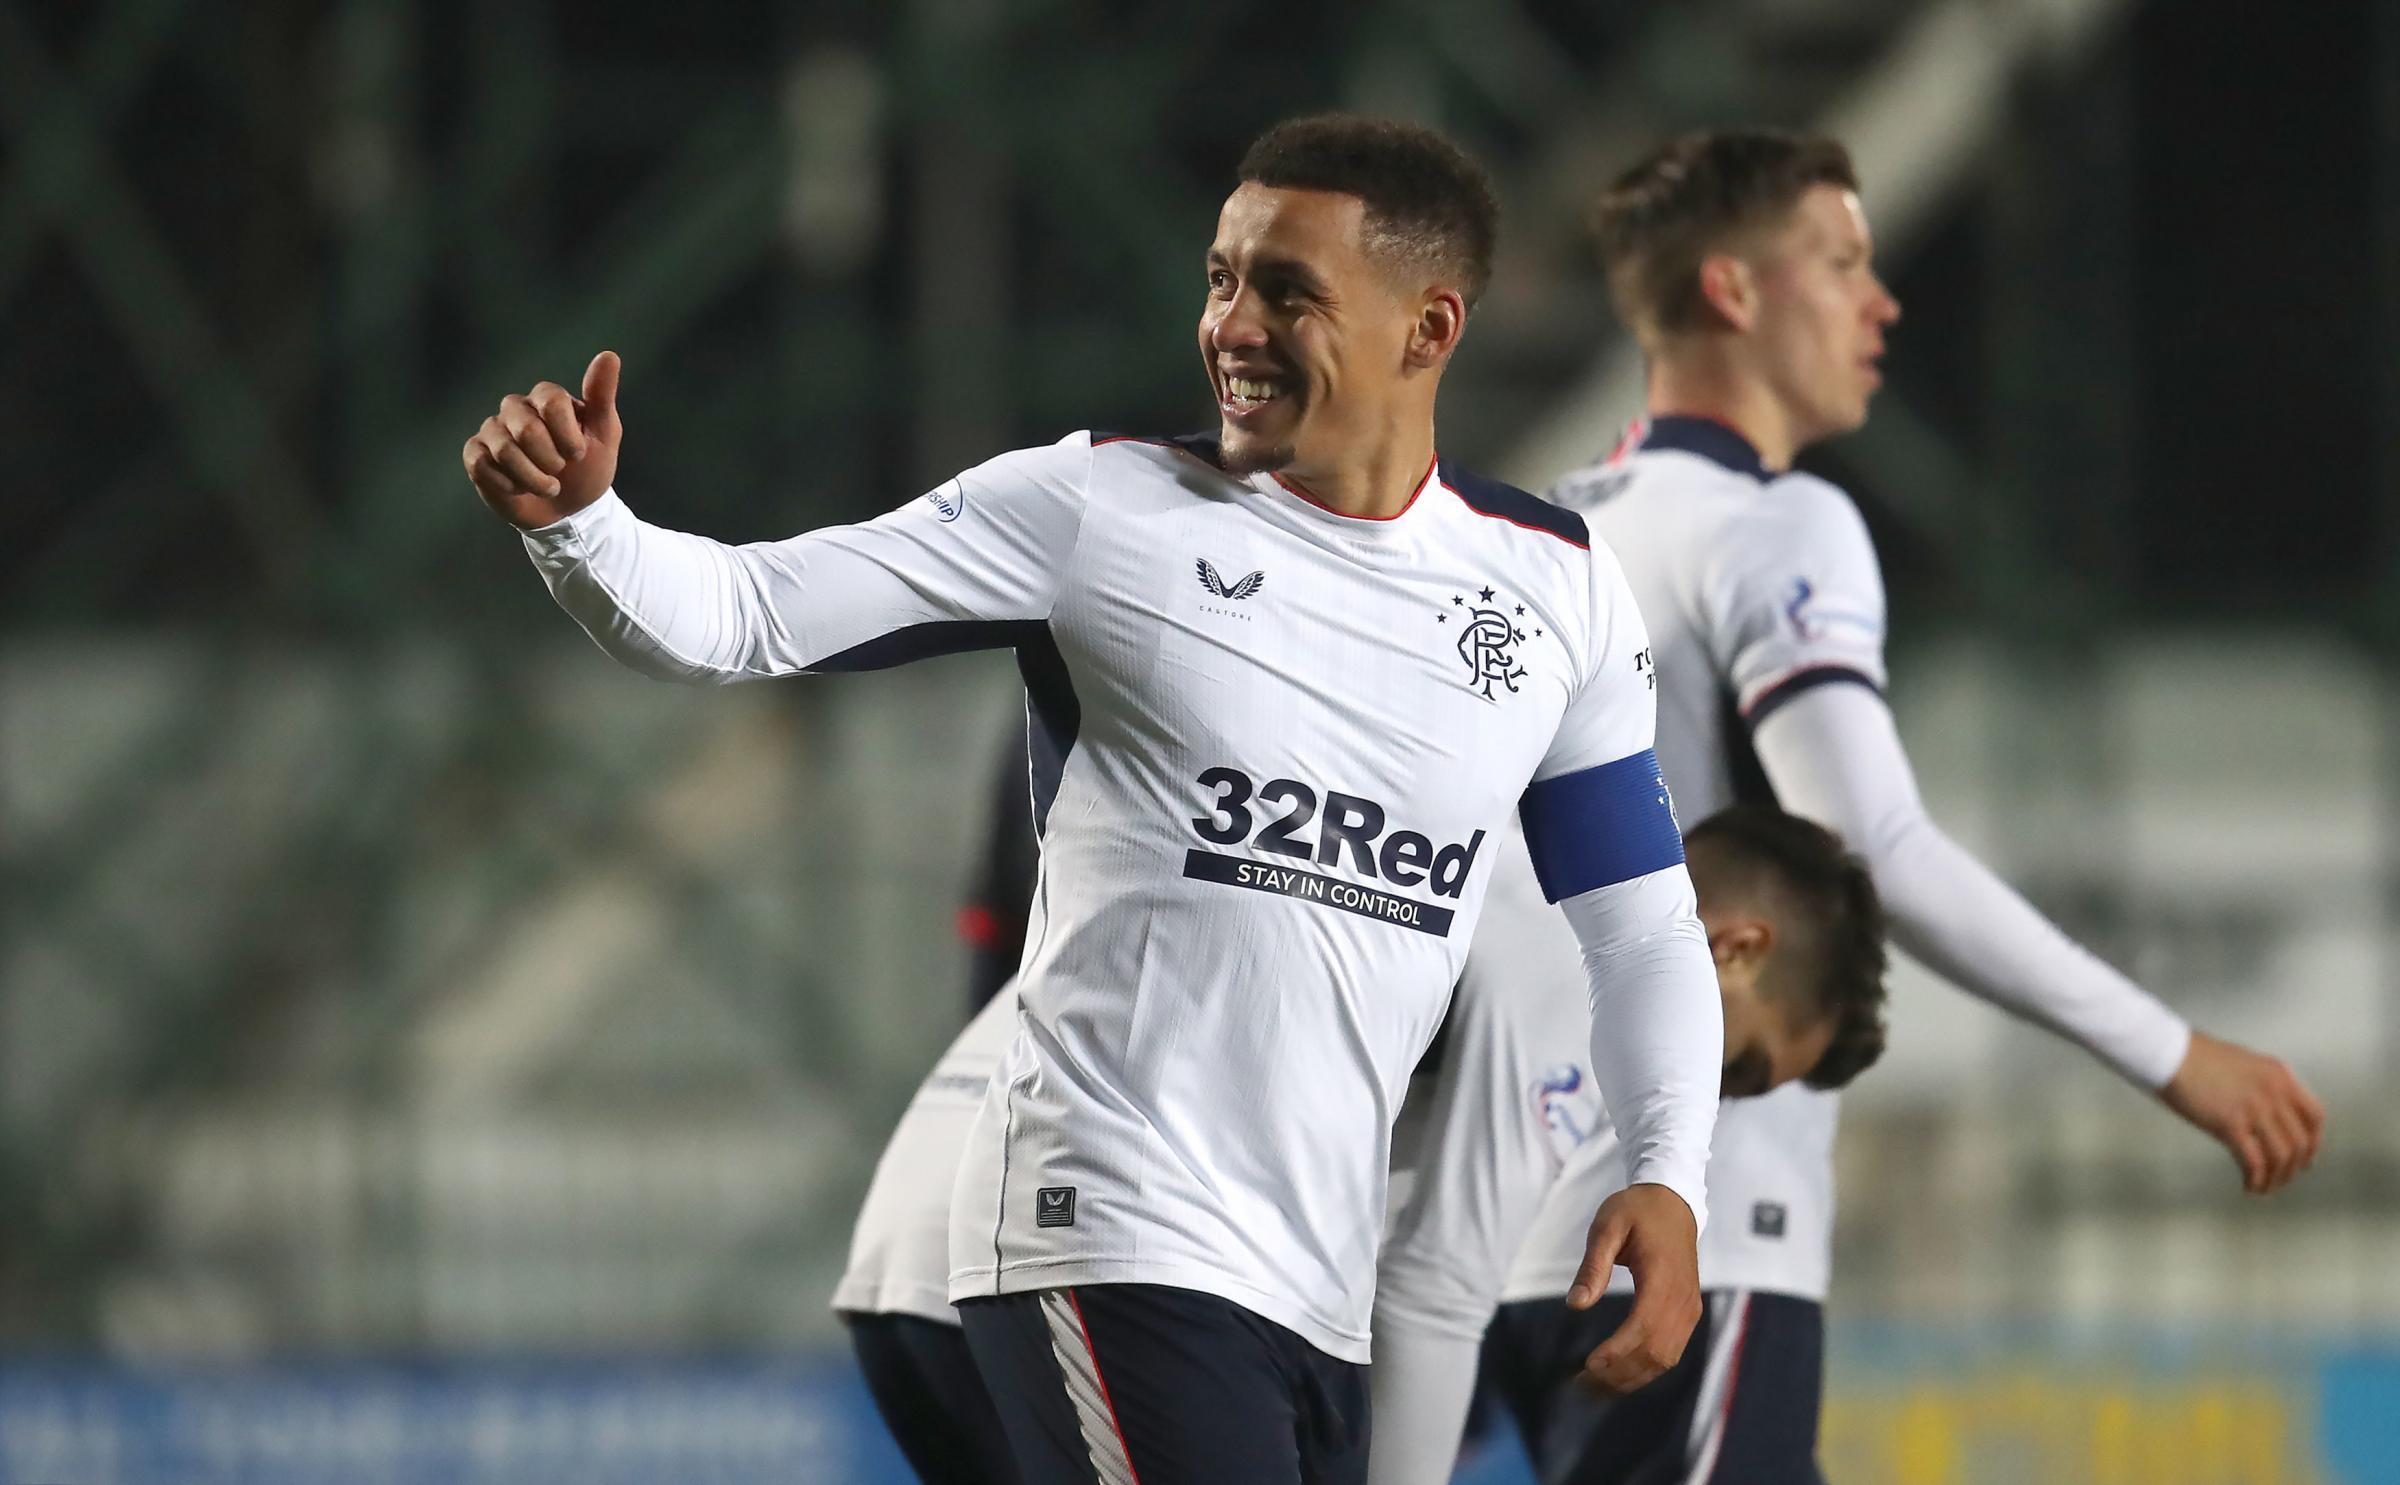 Rangers James Tavernier celebrates scoring his sides fourth goal of the game during the Scottish Premier League match at Falkirk 